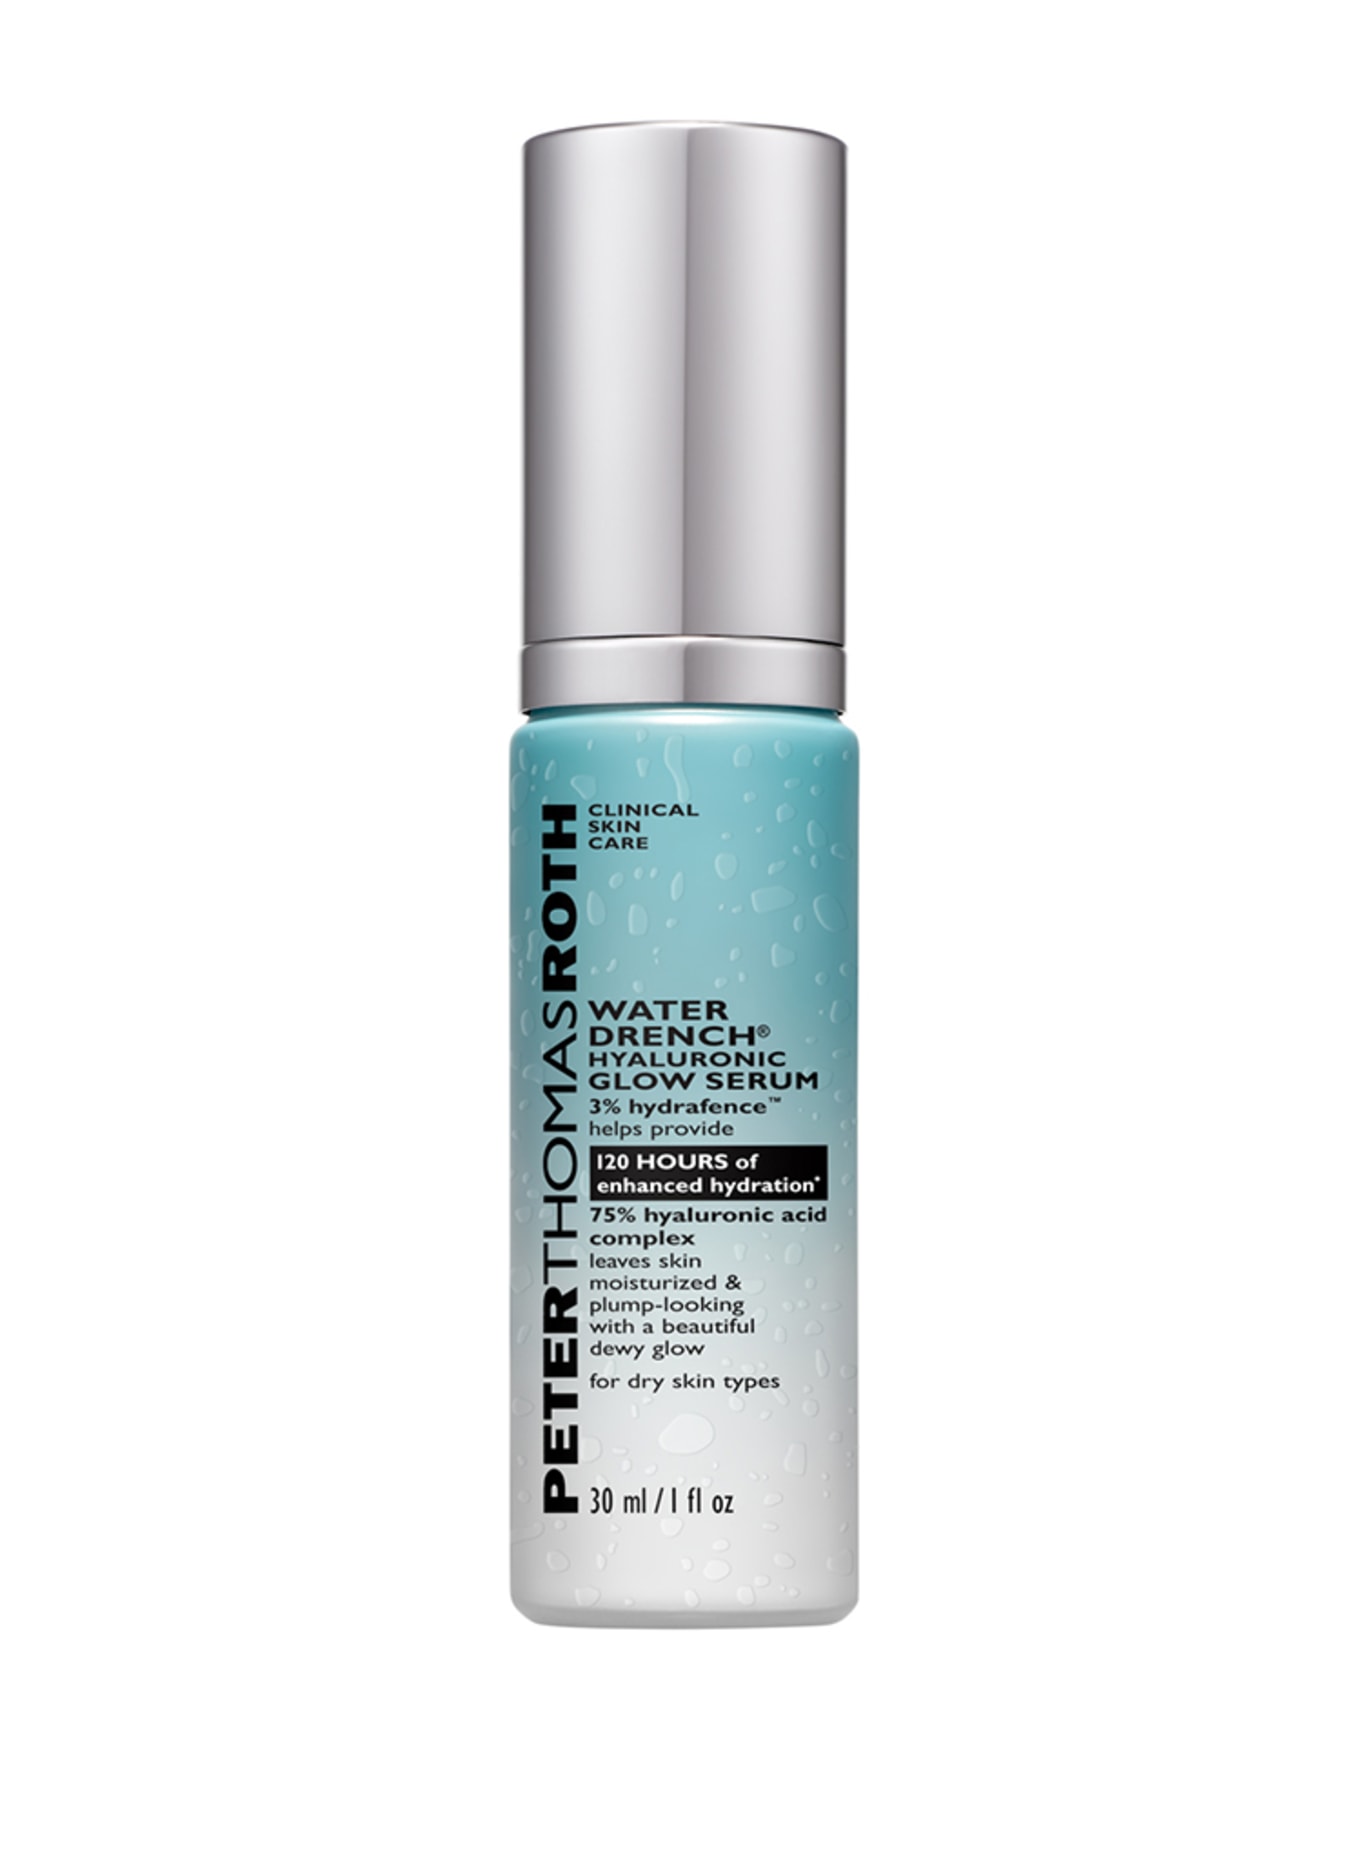 PETER THOMAS ROTH WATER DRENCH (Obrázek 1)